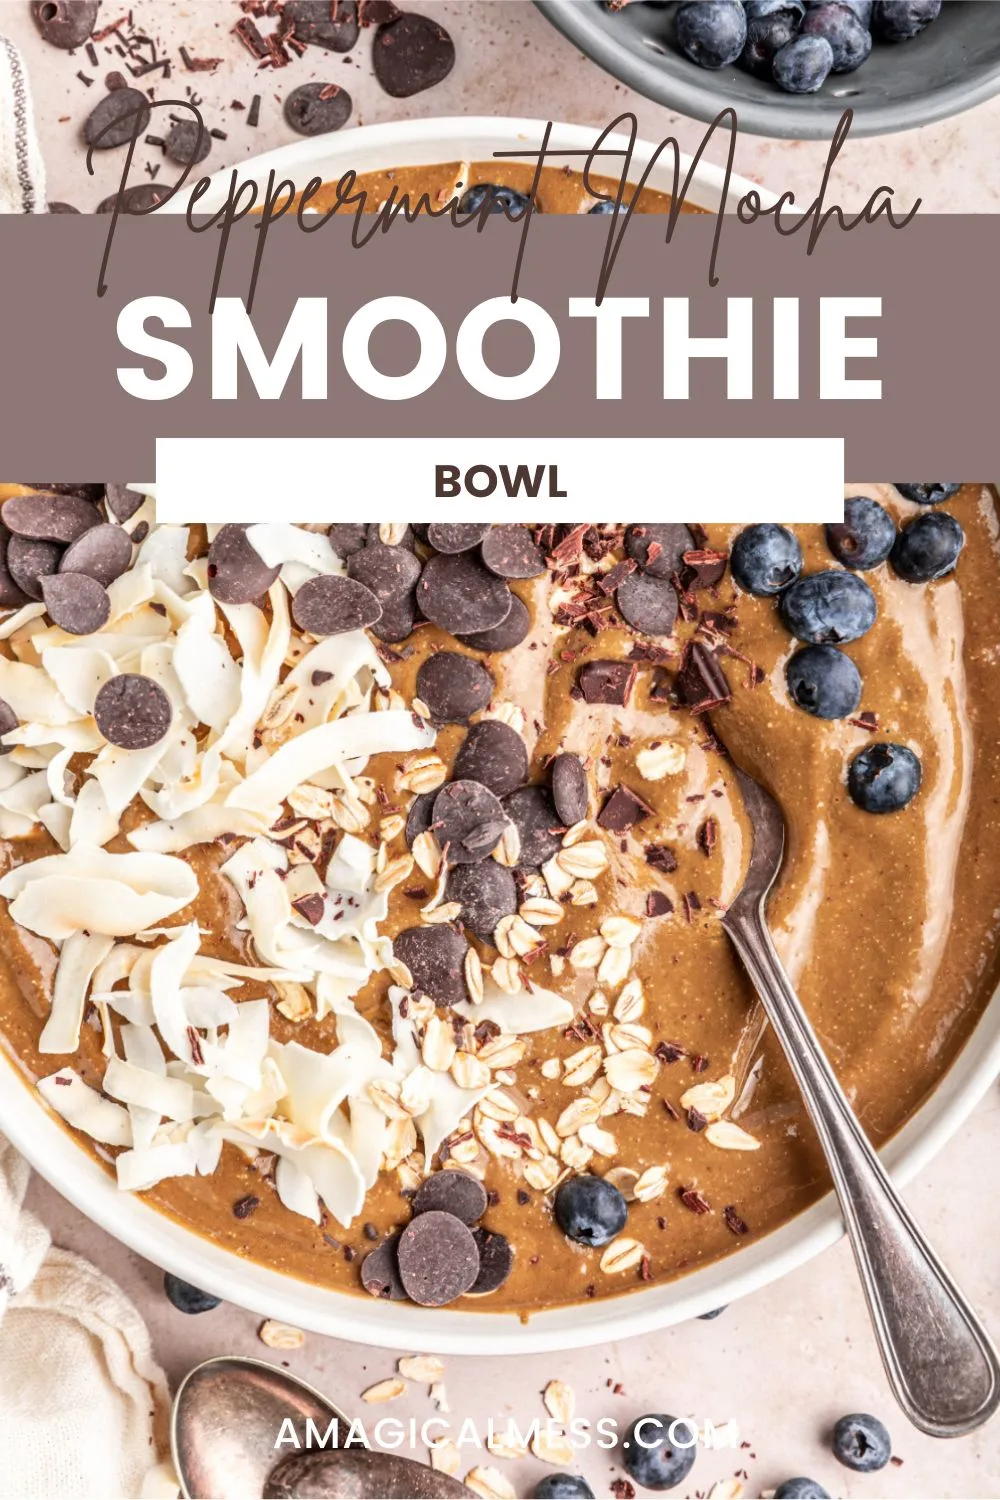 Peppermint mocha smoothie bowl topped with blueberries, chocolate chips, and coconut shavings.